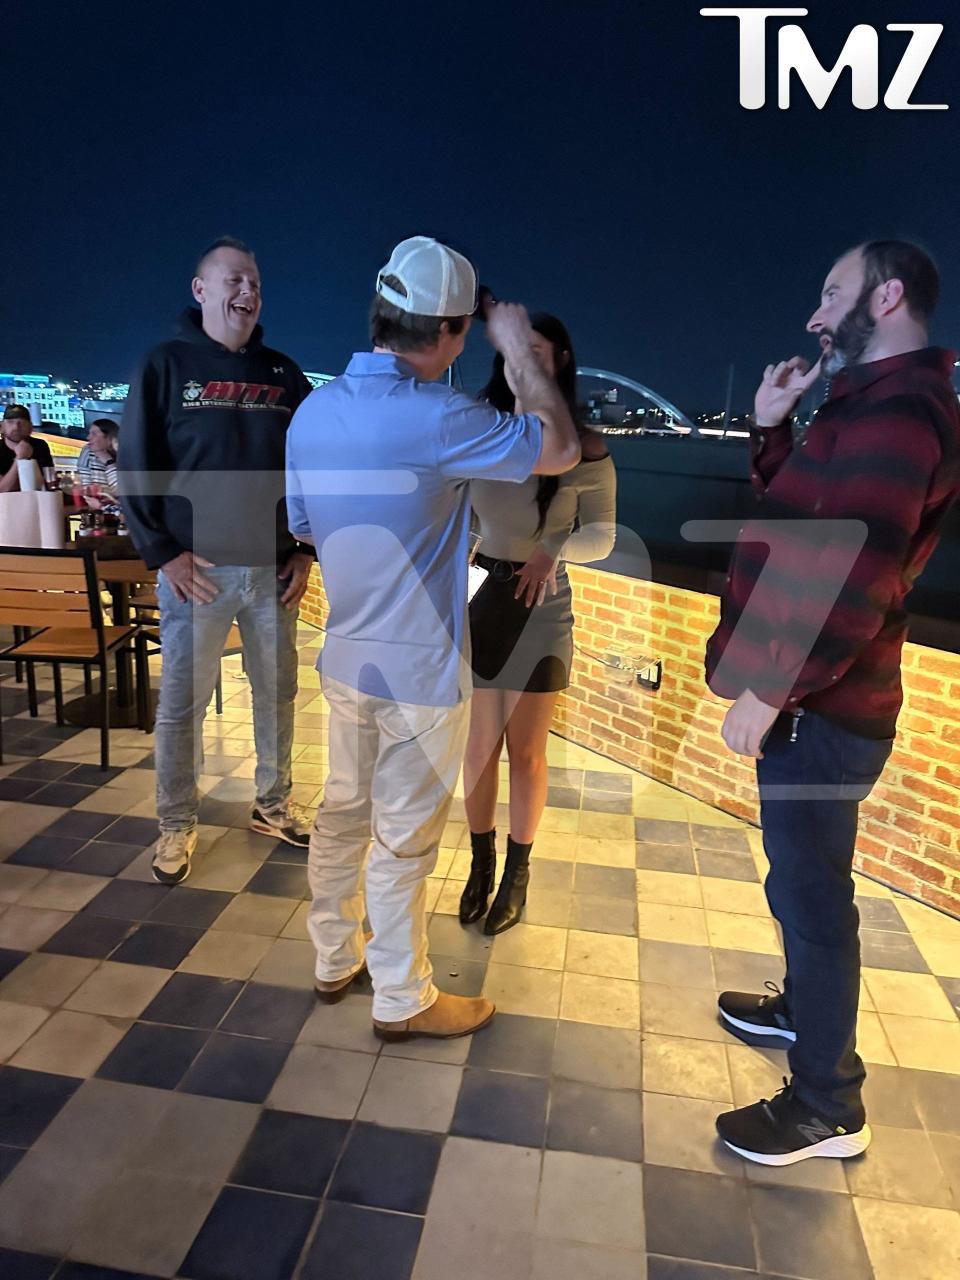 morgan wallen is seen chatting with a woman ijn a group on a rooftop before the chair-throwing incident